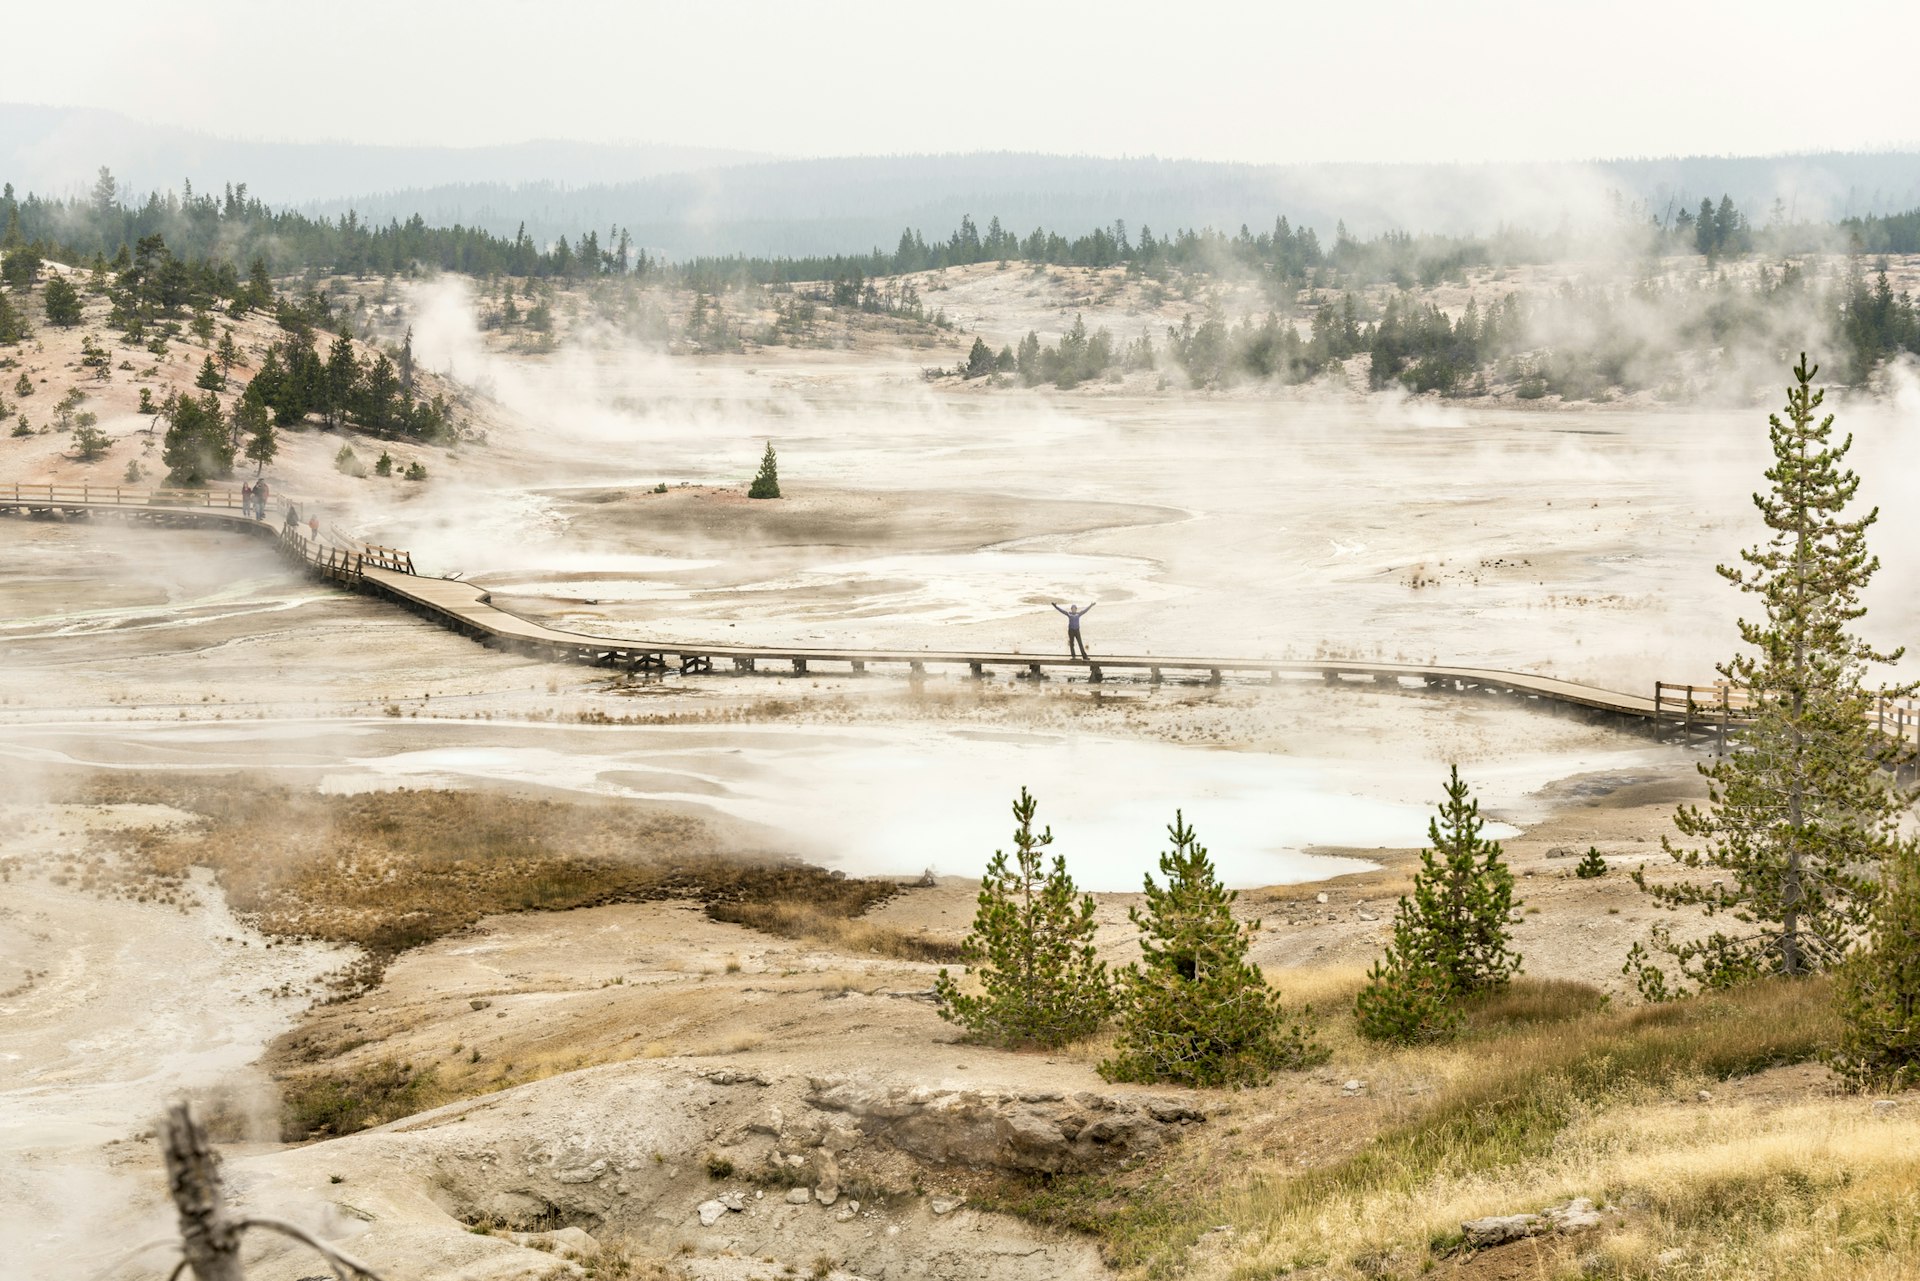 A woman holds her hands in the air and smiles as she stands alone on a boardwalk through flat landscape punctuated by geysers